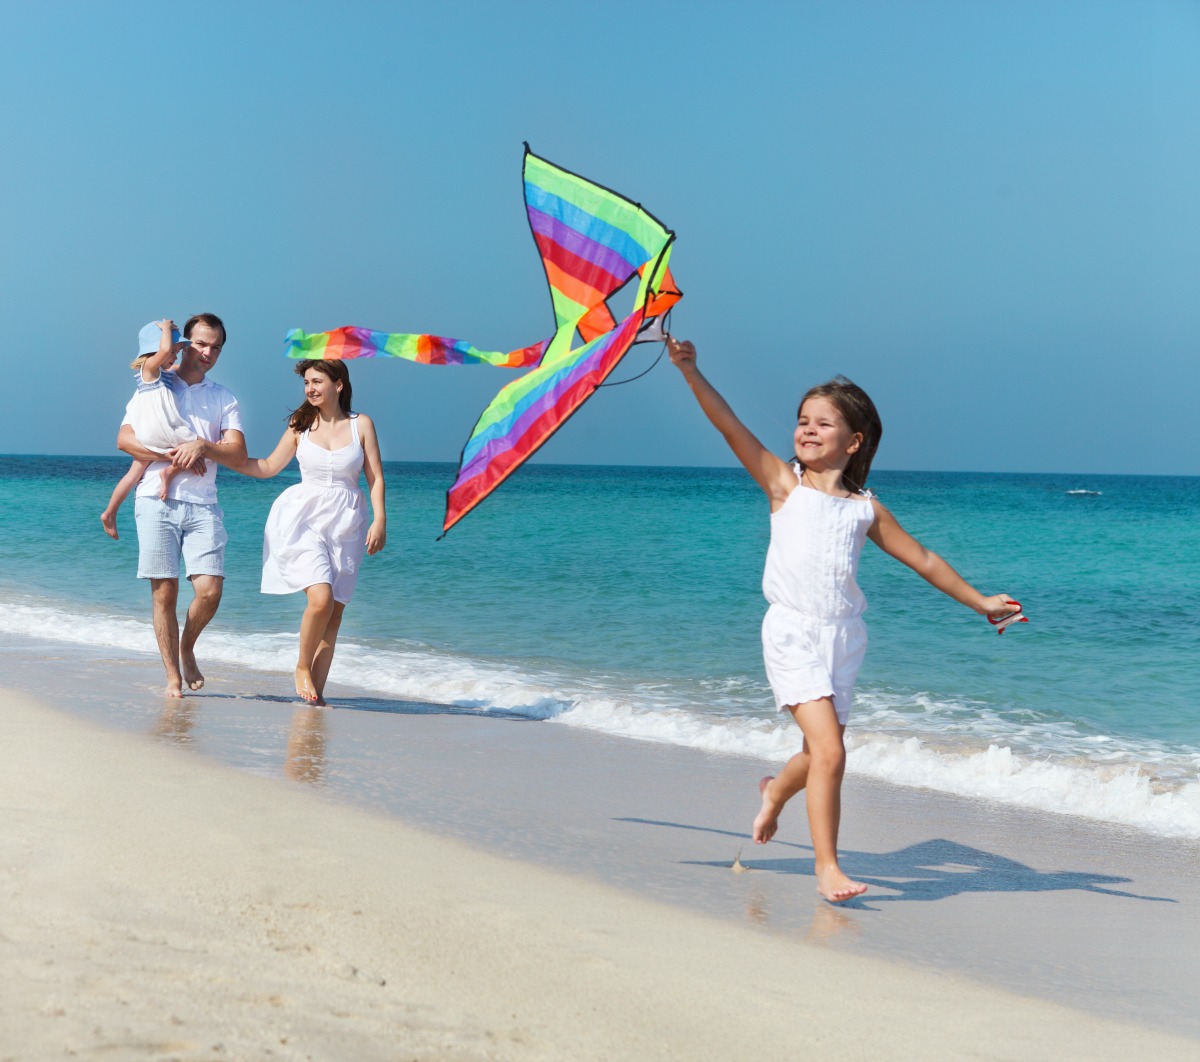 Flying kites is fun for the whole family